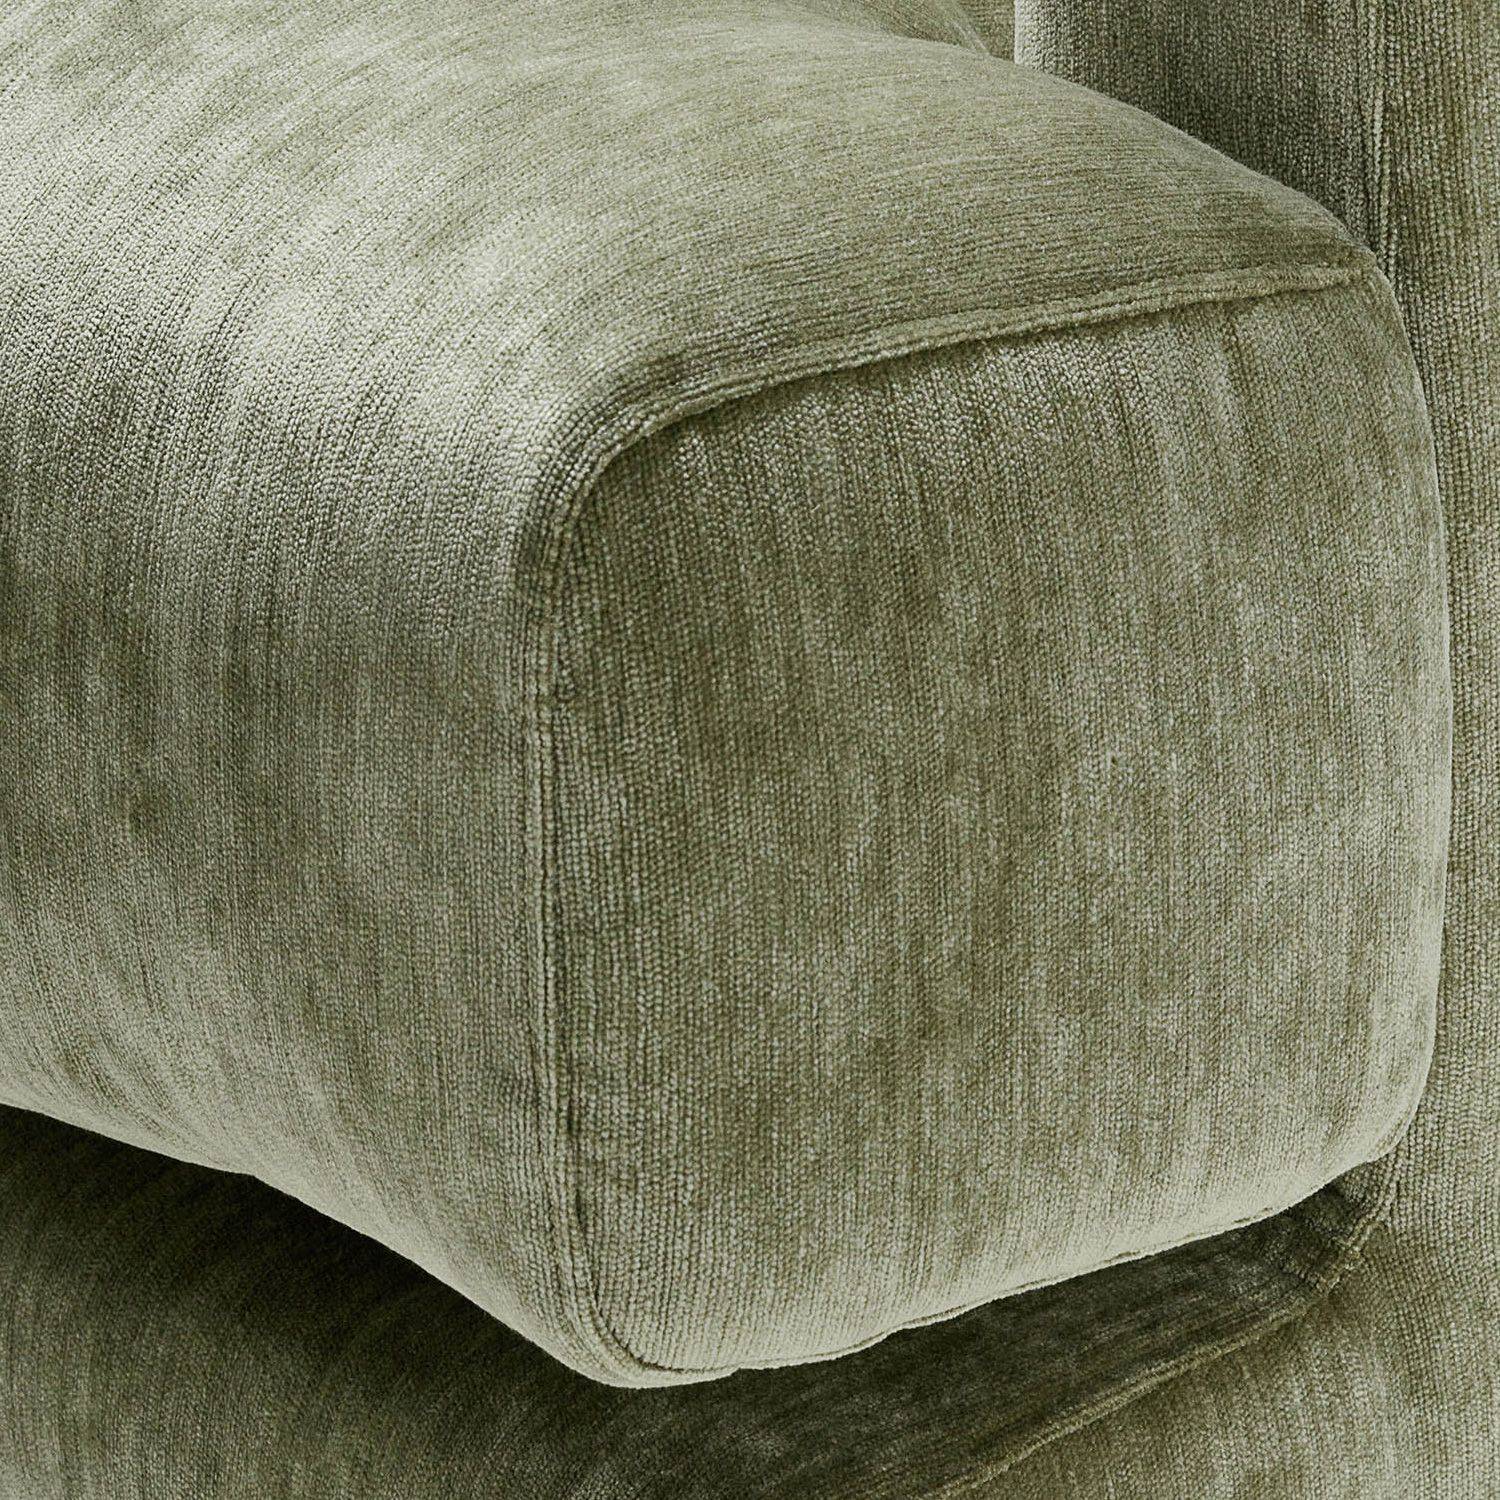 The Wren Sofa Collection - New Online At BF Home